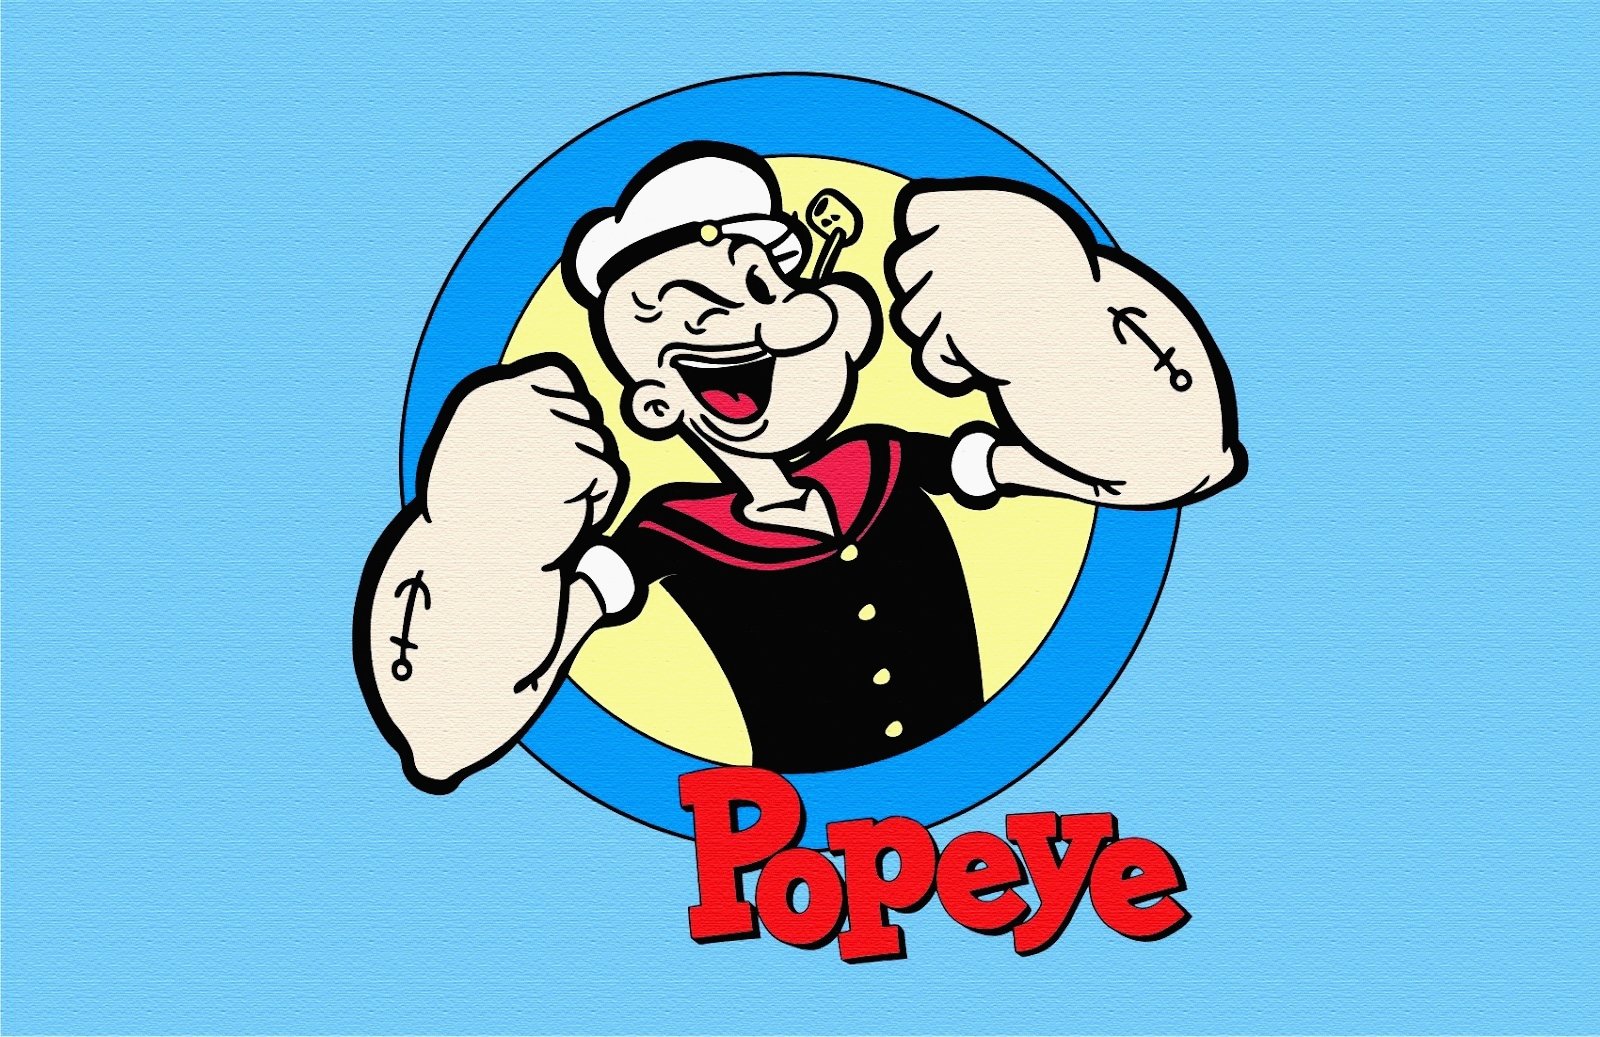 Popeye the Sailor (1960 to 1963)